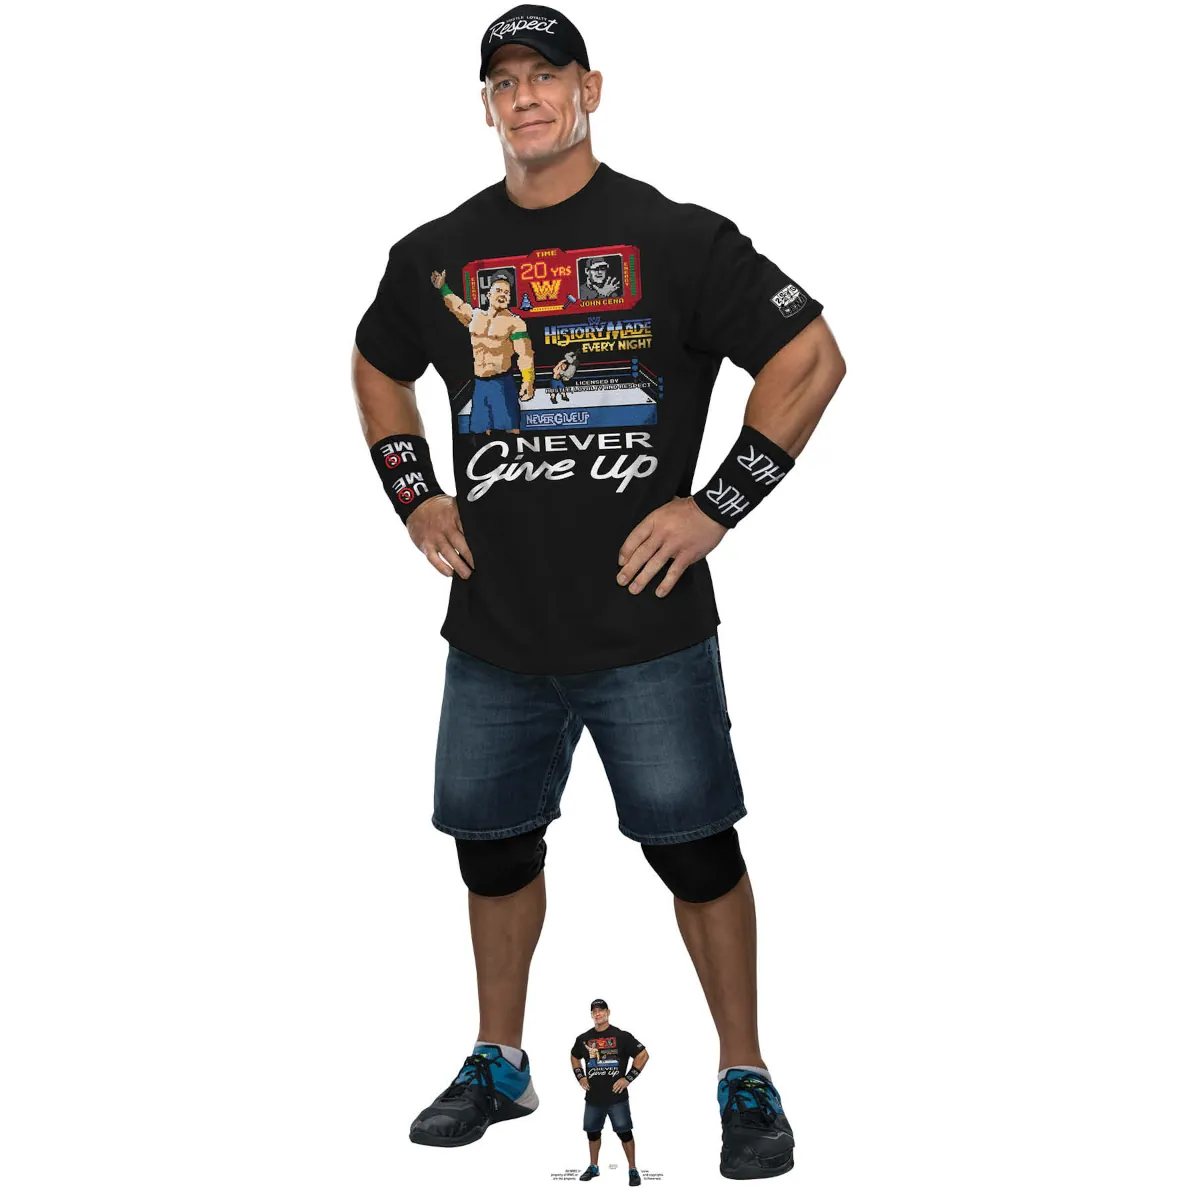 SC4158 John Cena 'Black Outfit' (WWE) Official Lifesize + Mini Cardboard Cutout Standee Front